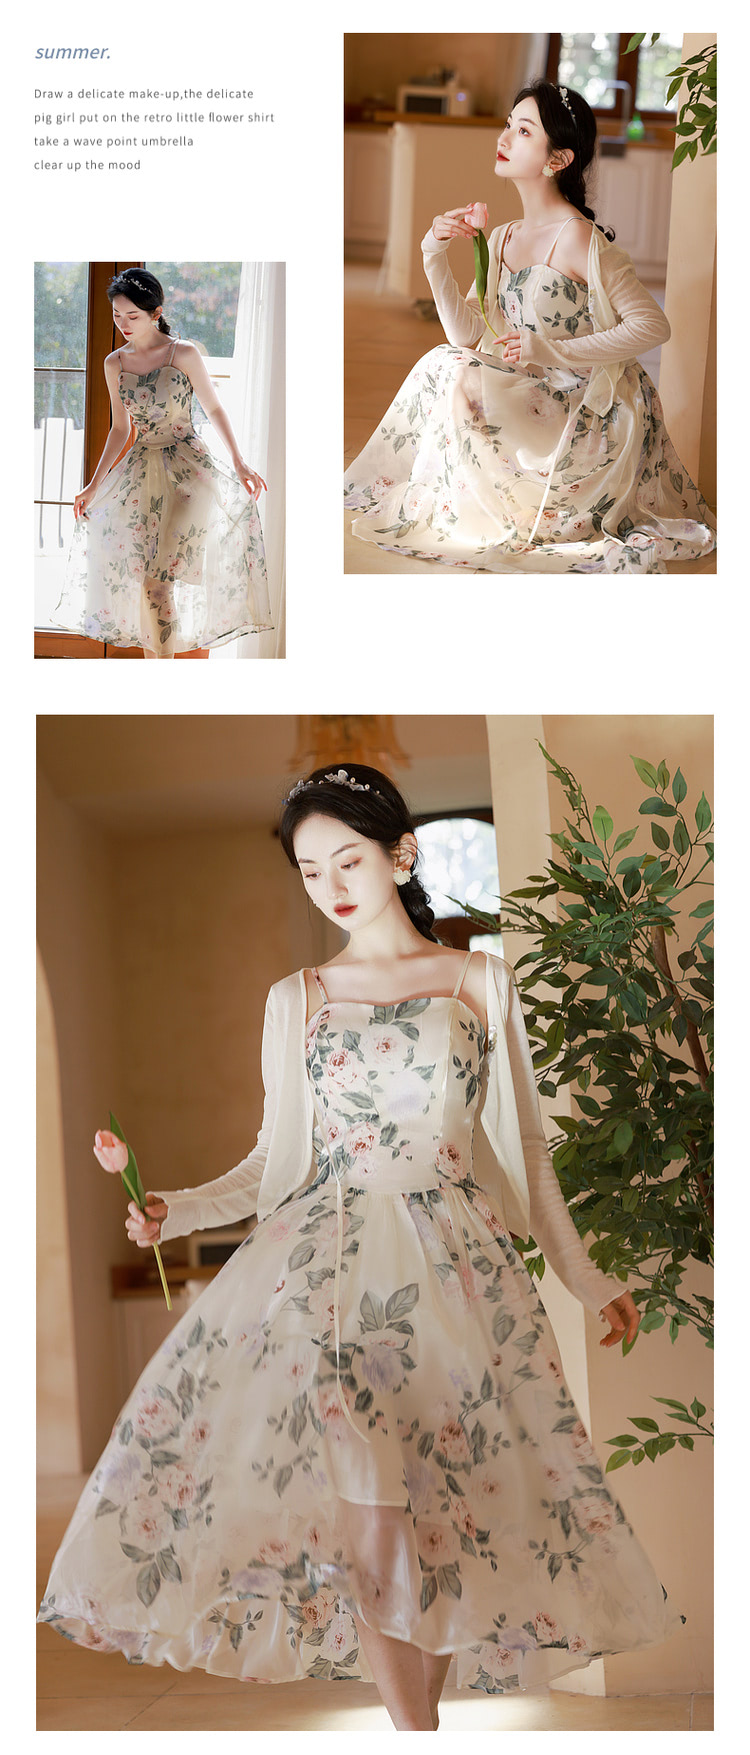 Aesthetic-A-Line-Floral-Printed-Summer-Casual-Slip-Maxi-Dress15.jpg